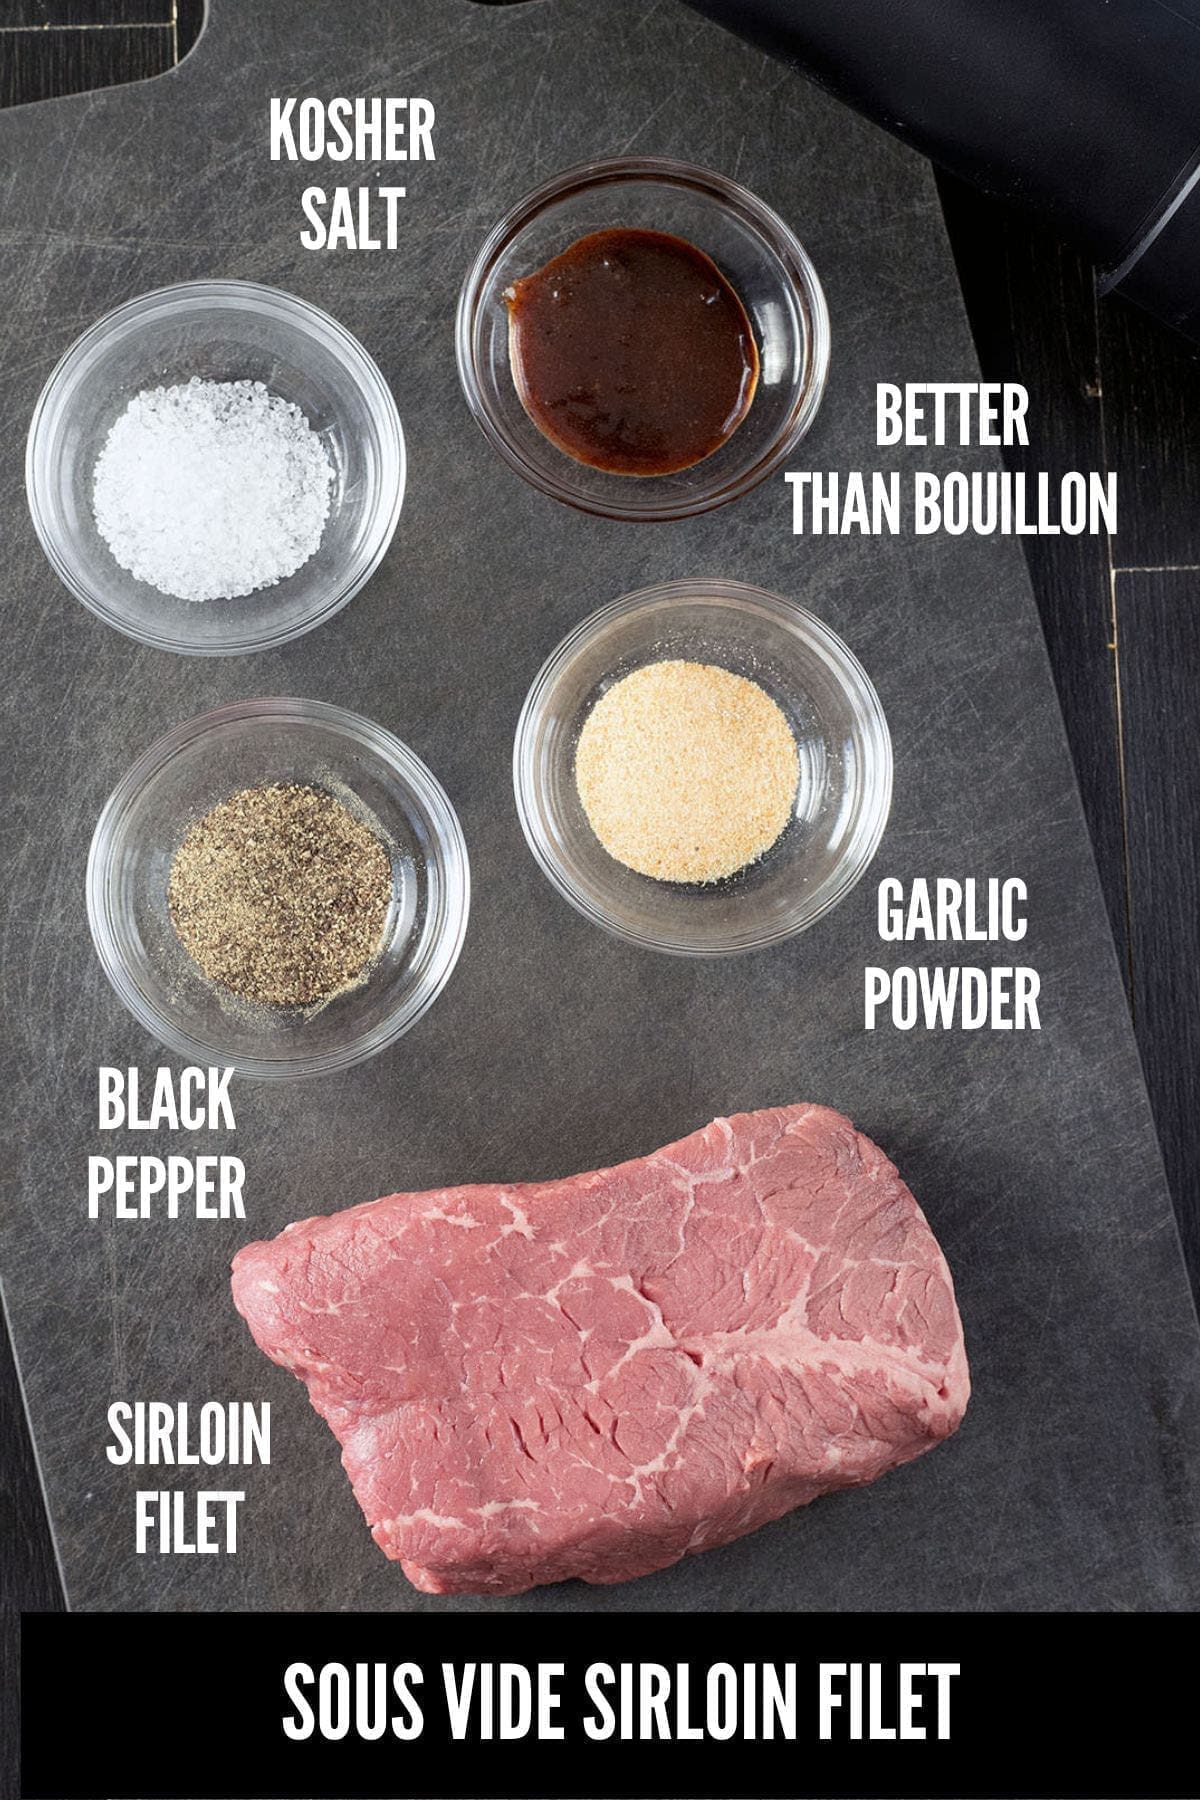 Labeled photo showing ingredients to make Sous Vide Sirloin Filet.